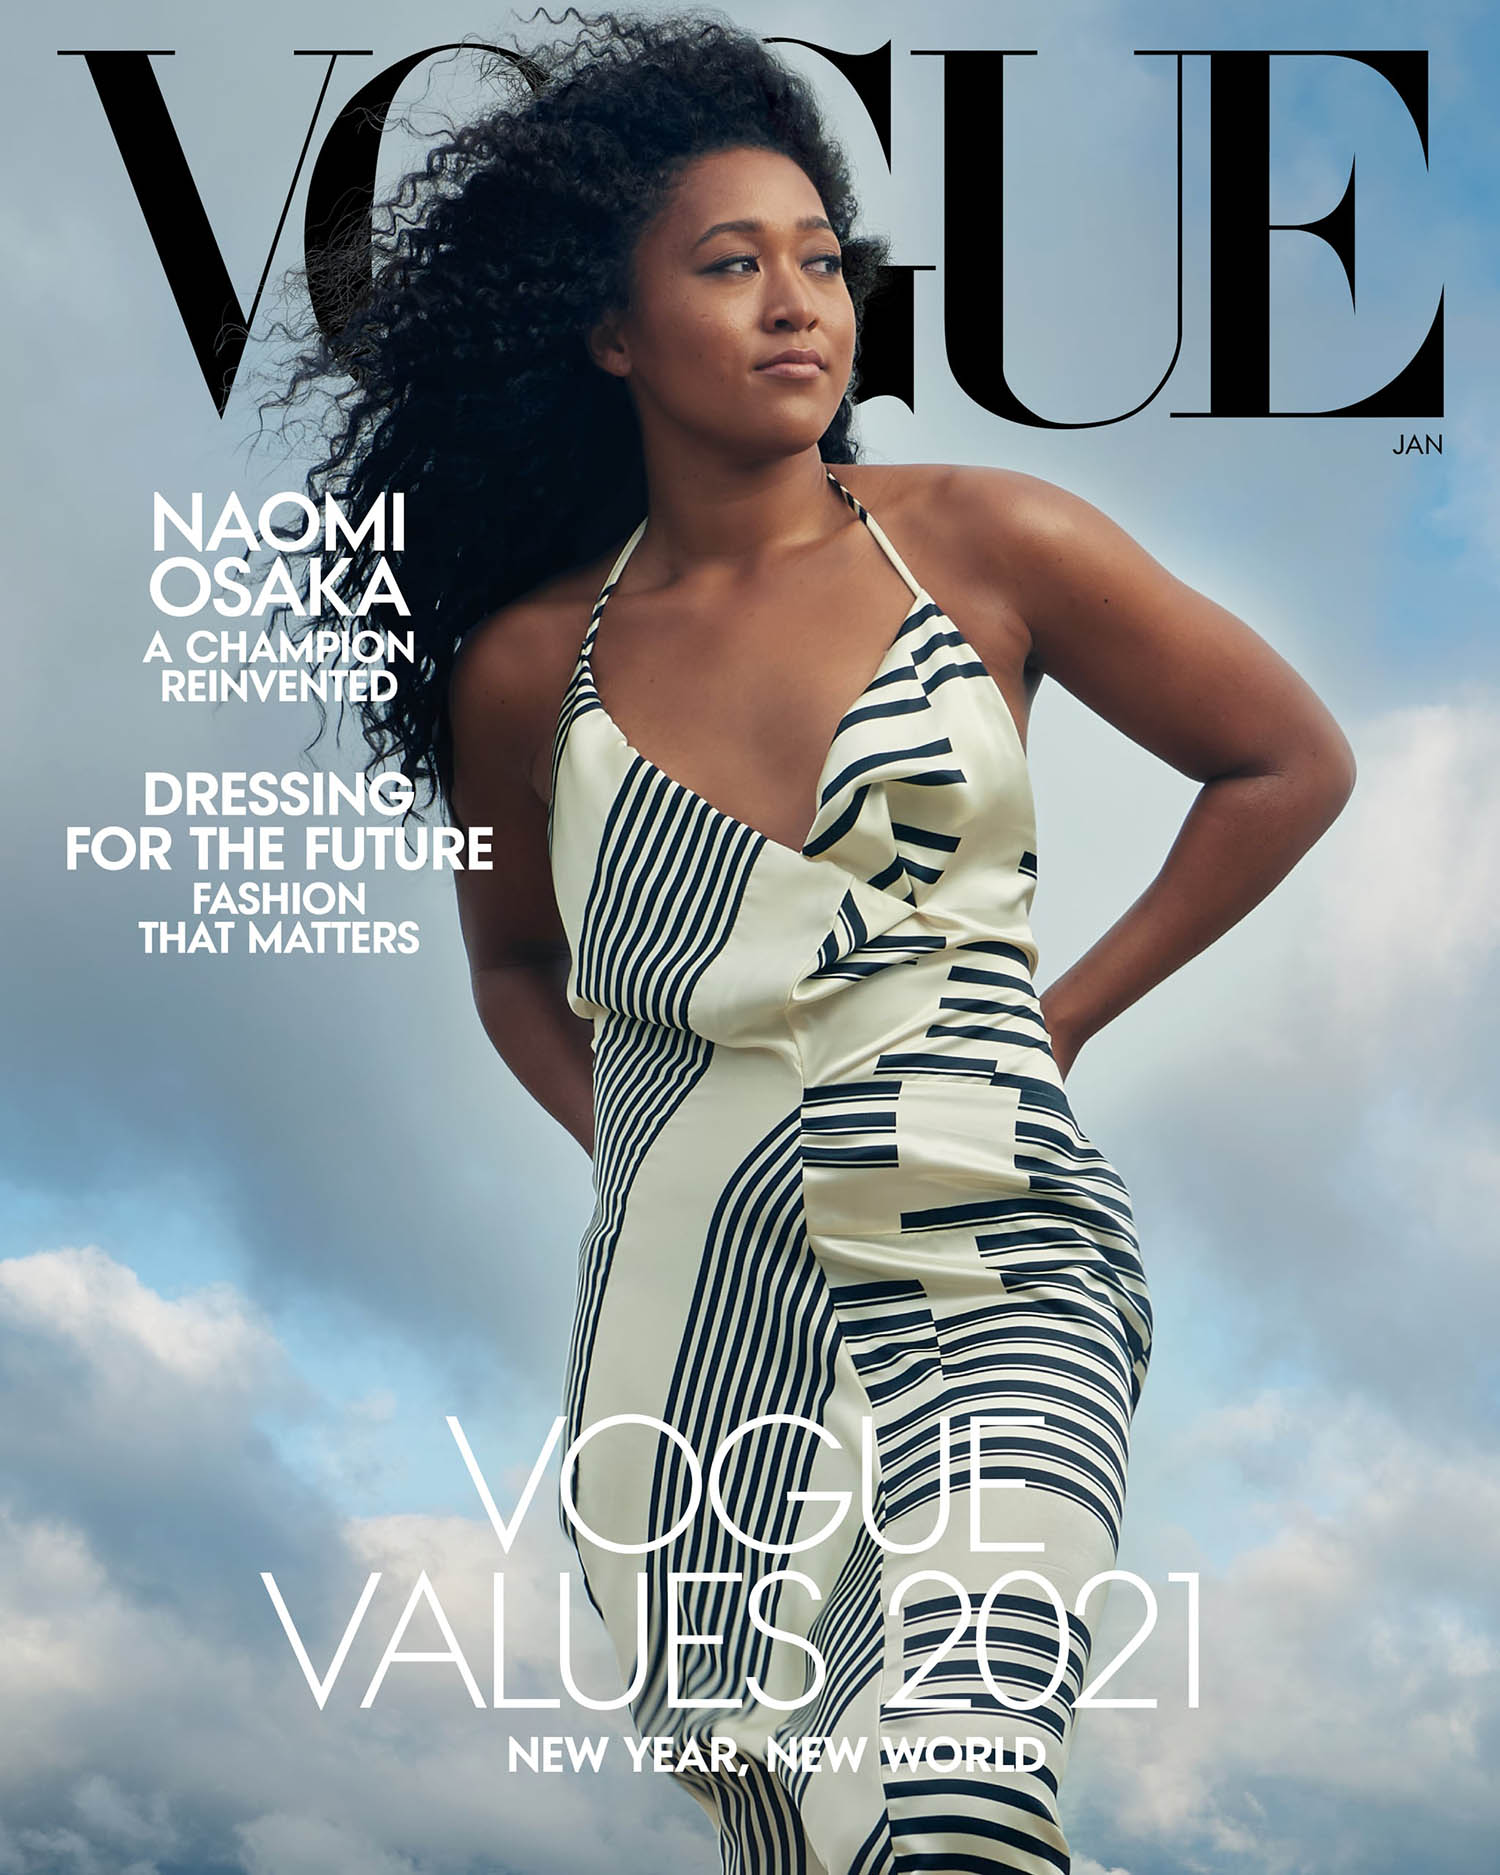 Vogue US January 2021 covers by Annie Leibovitz